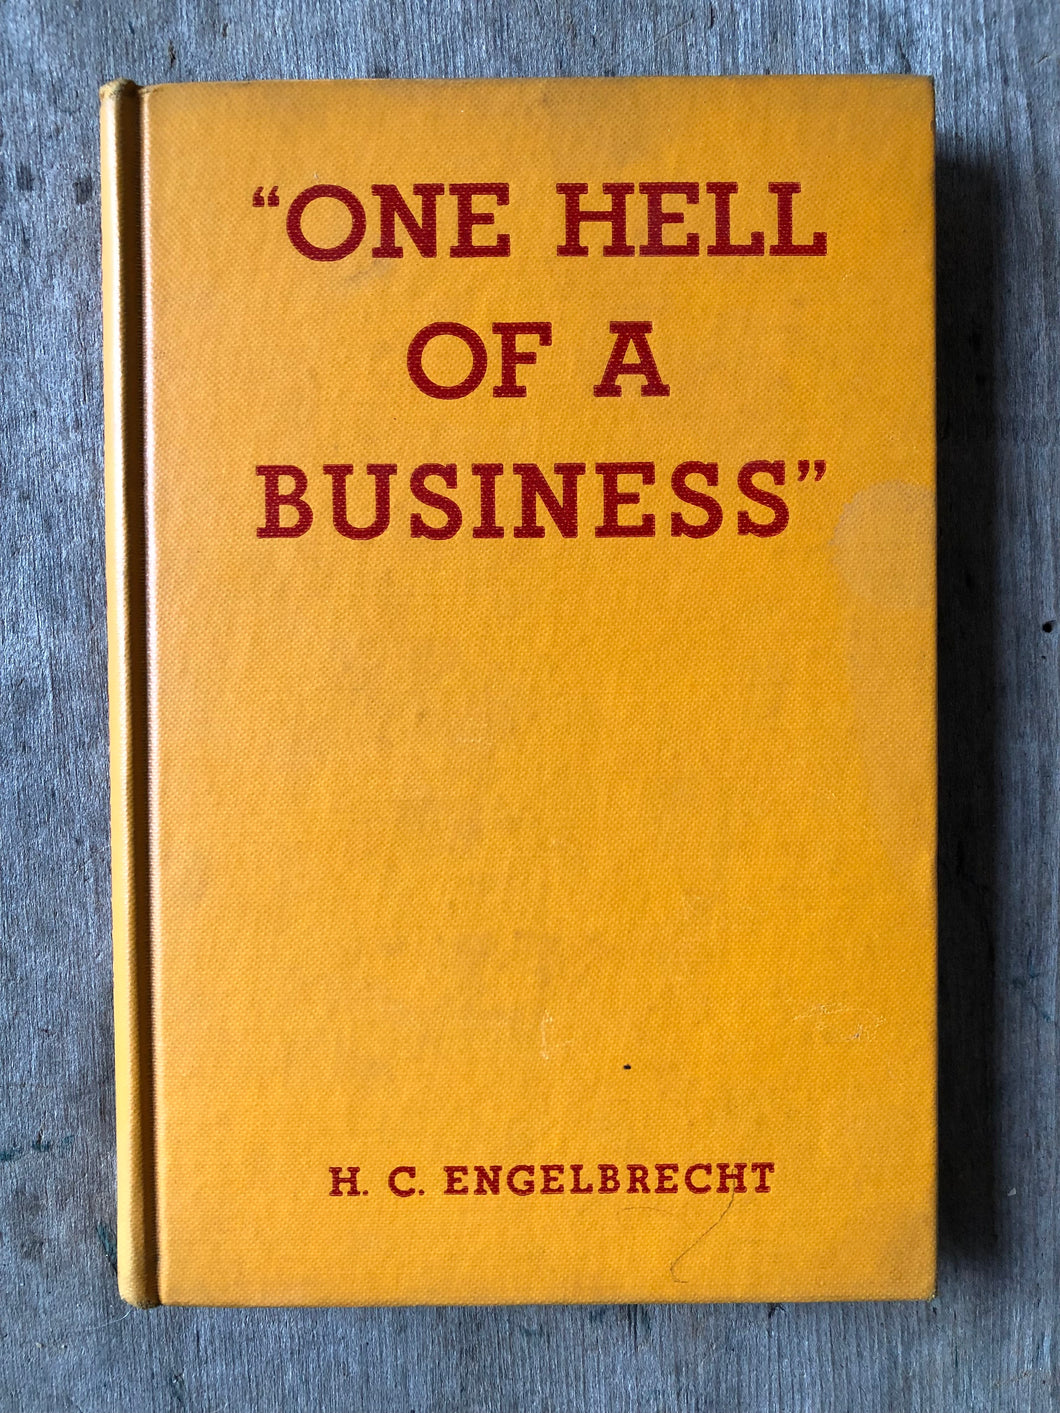 One Hell of a Business by H. C. Engelbrecht, Ph.D